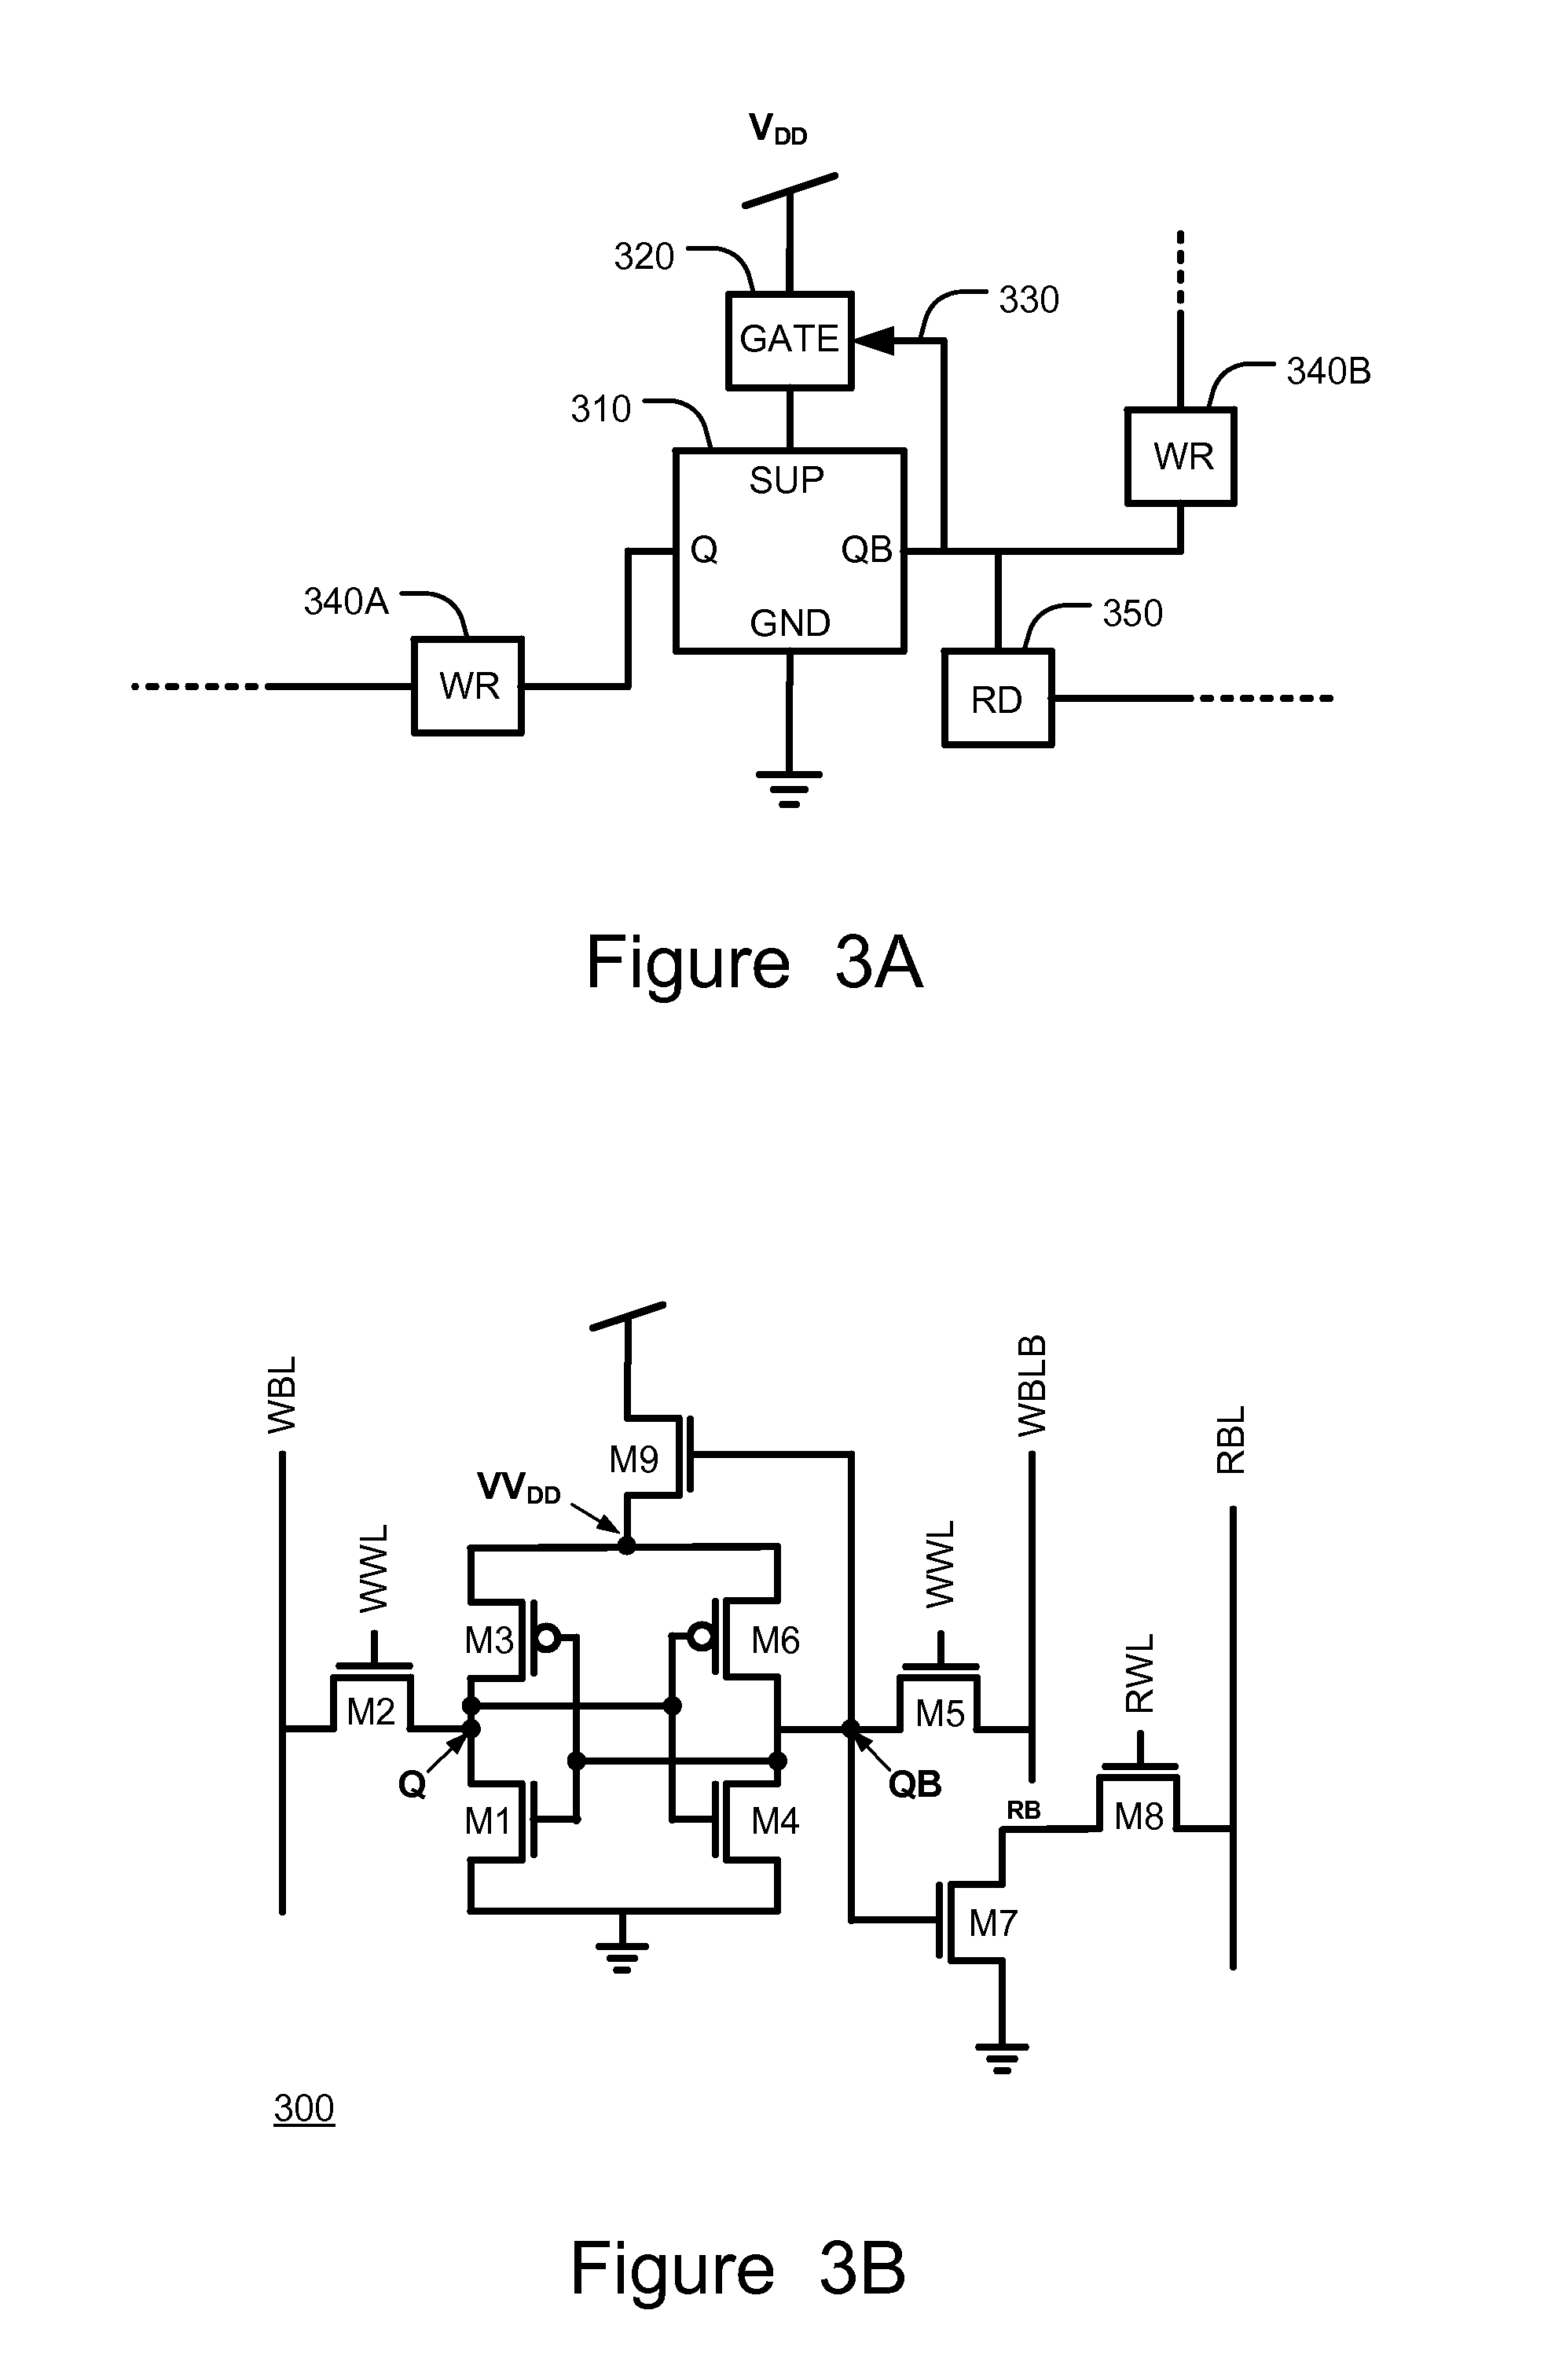 Ultra low power memory cell with a supply feedback loop configured for minimal leakage operation